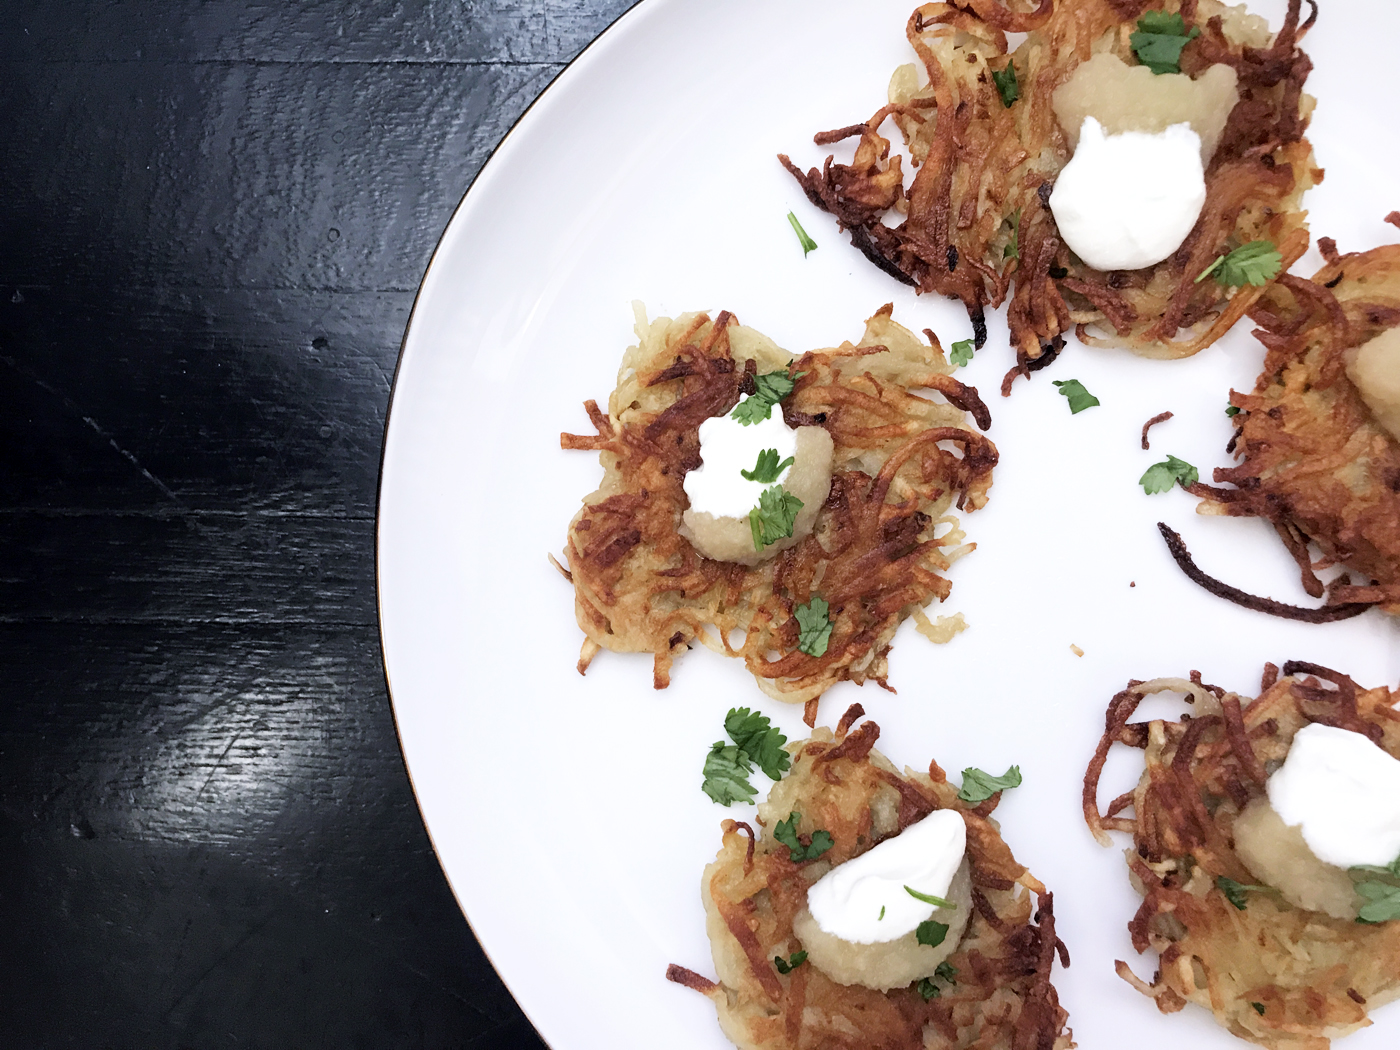 Things Alexa can do during the holidays: Give you recipes for leftover latkes | Photo (c) Stacie Billis for Cool Mom Tech